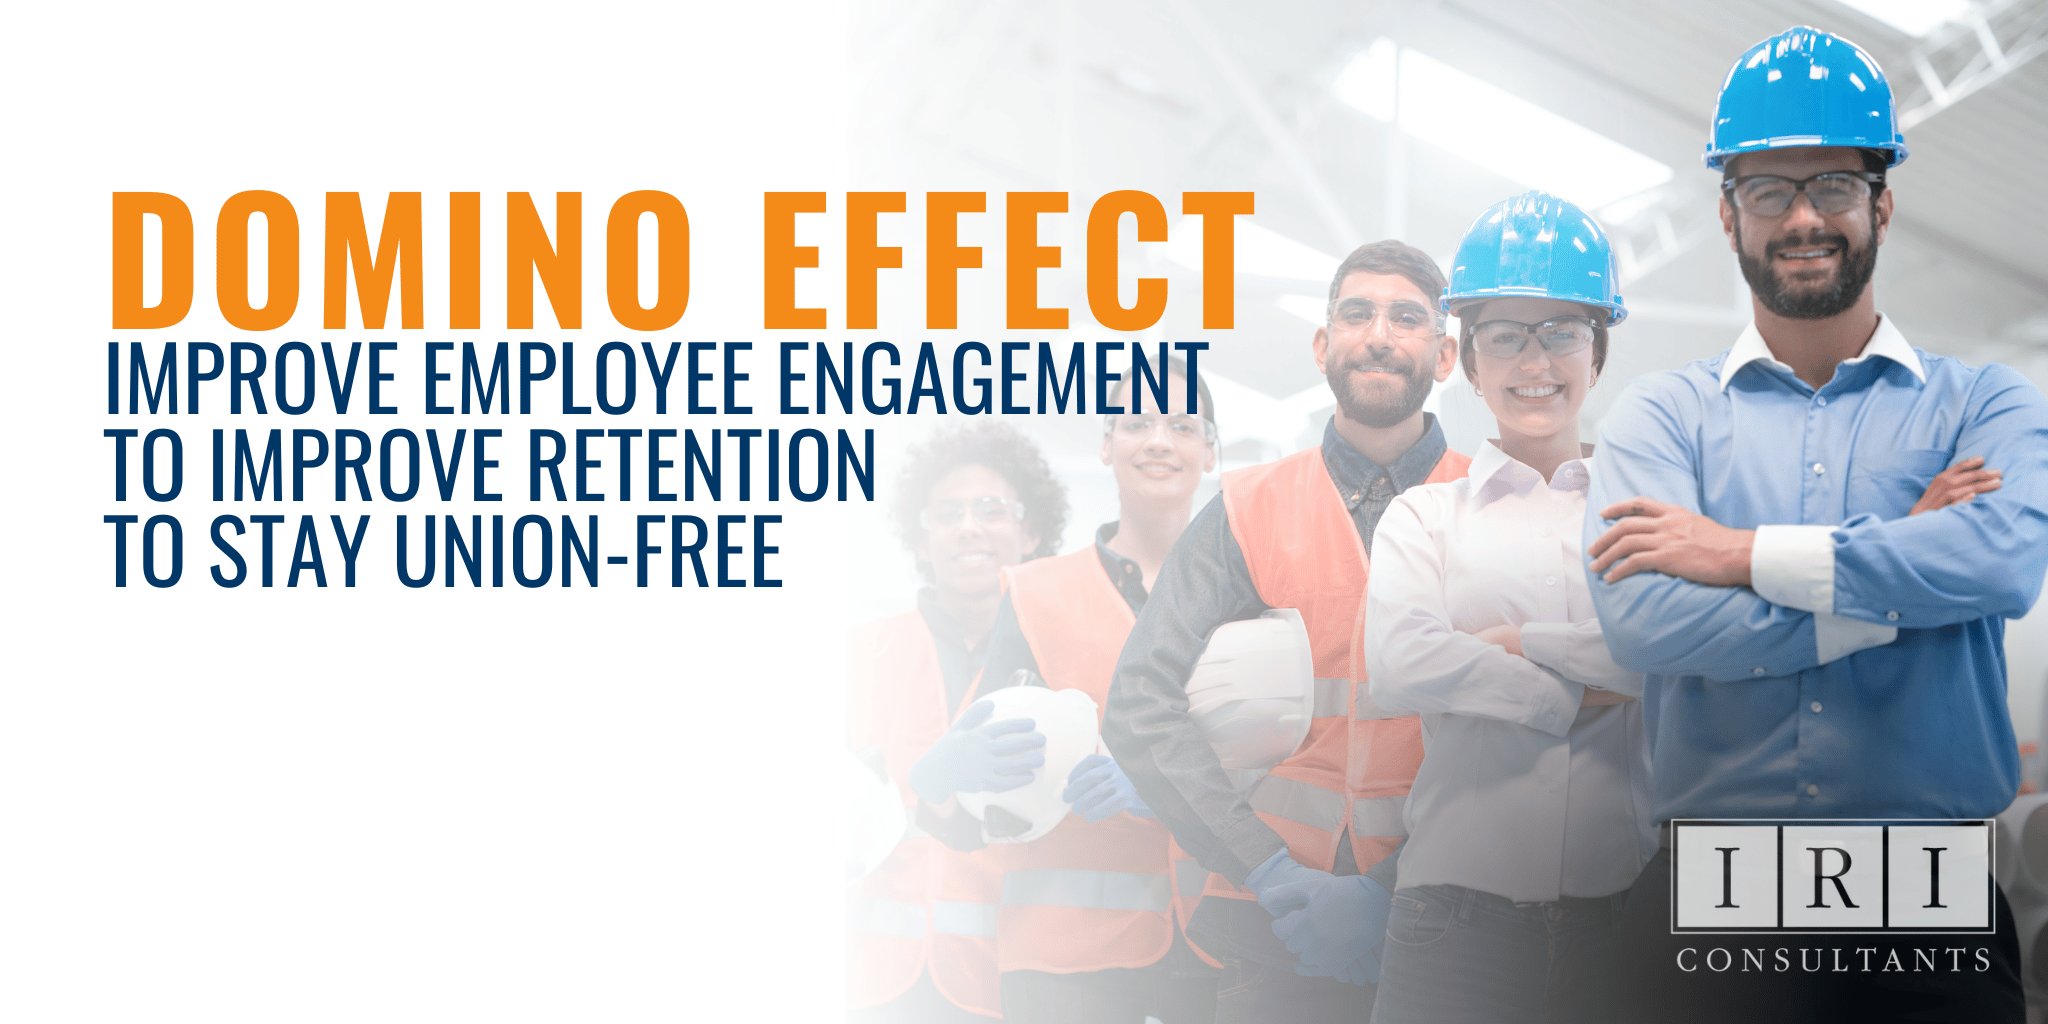 Domino Effect Improve Employee Engagement, to Improve Retention, to Stay Union-Free